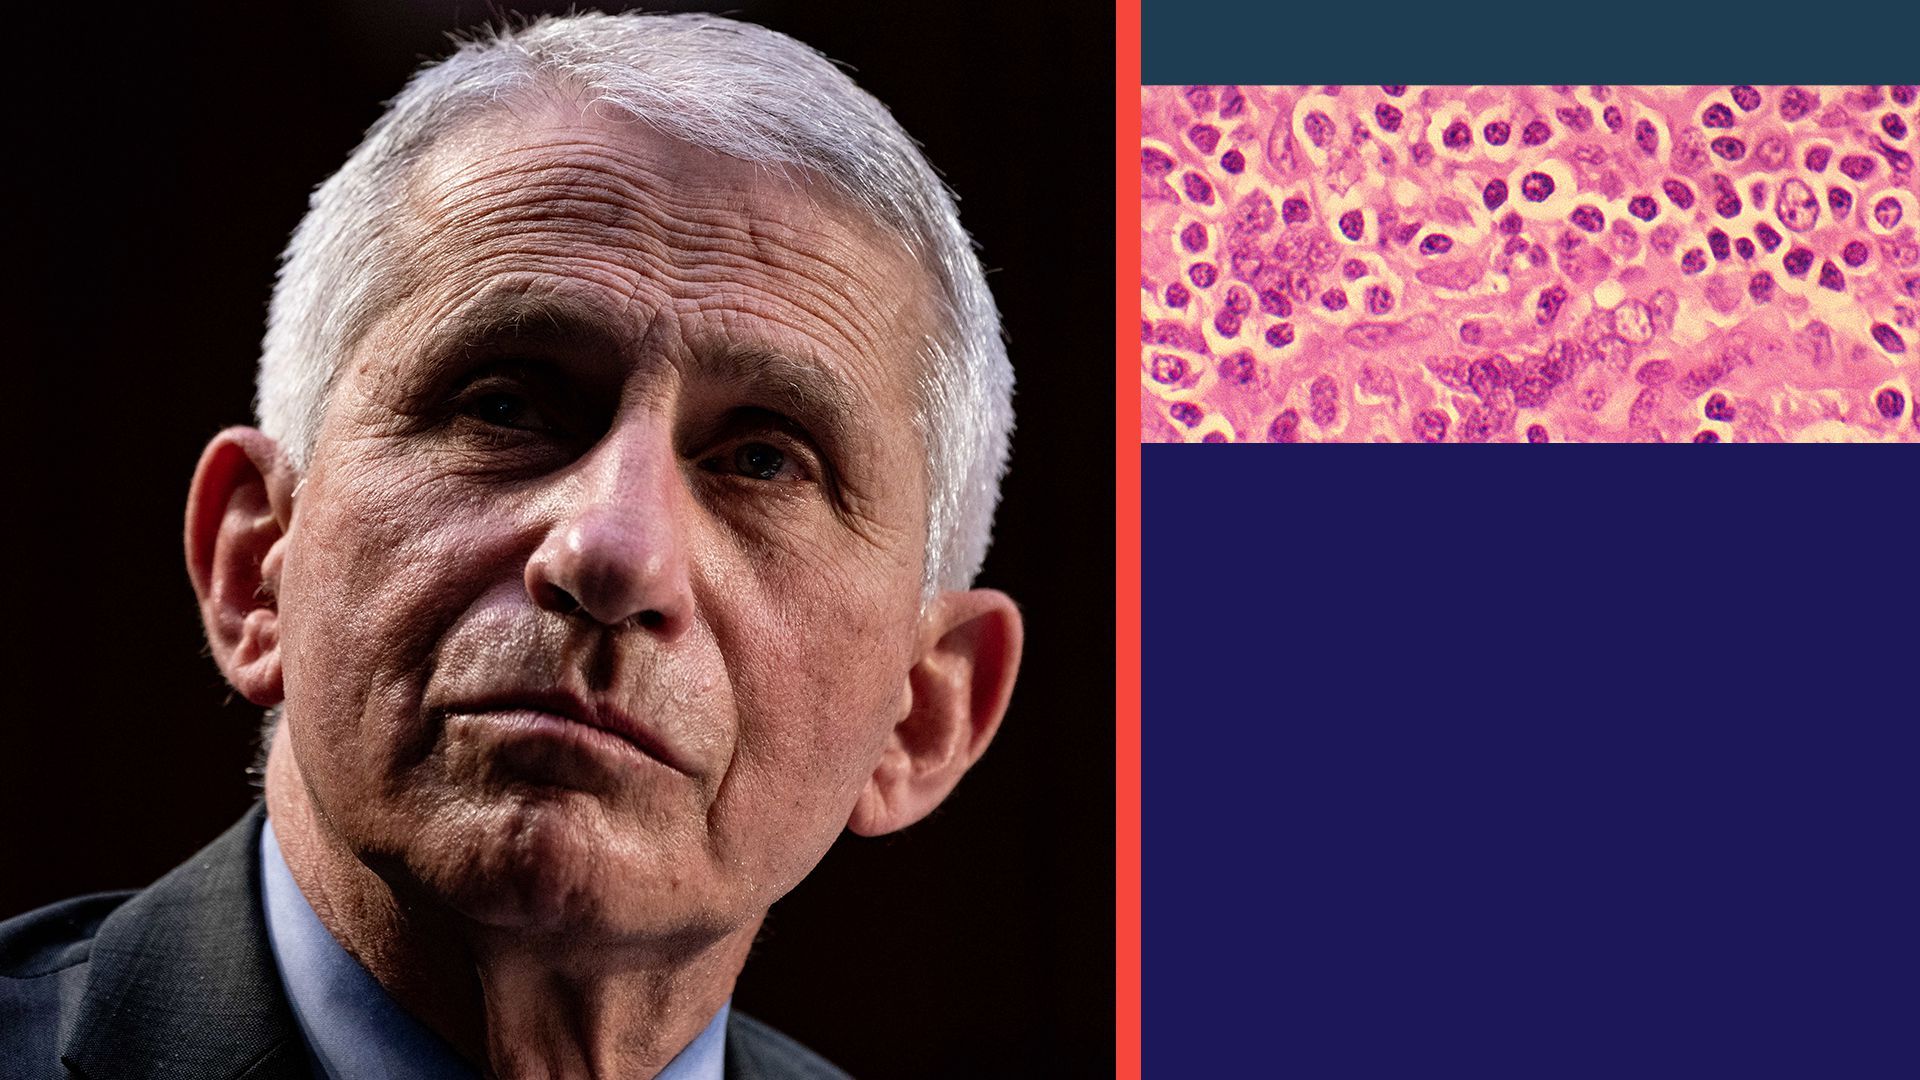 Illustration collage of Dr. Anthony Fauci.